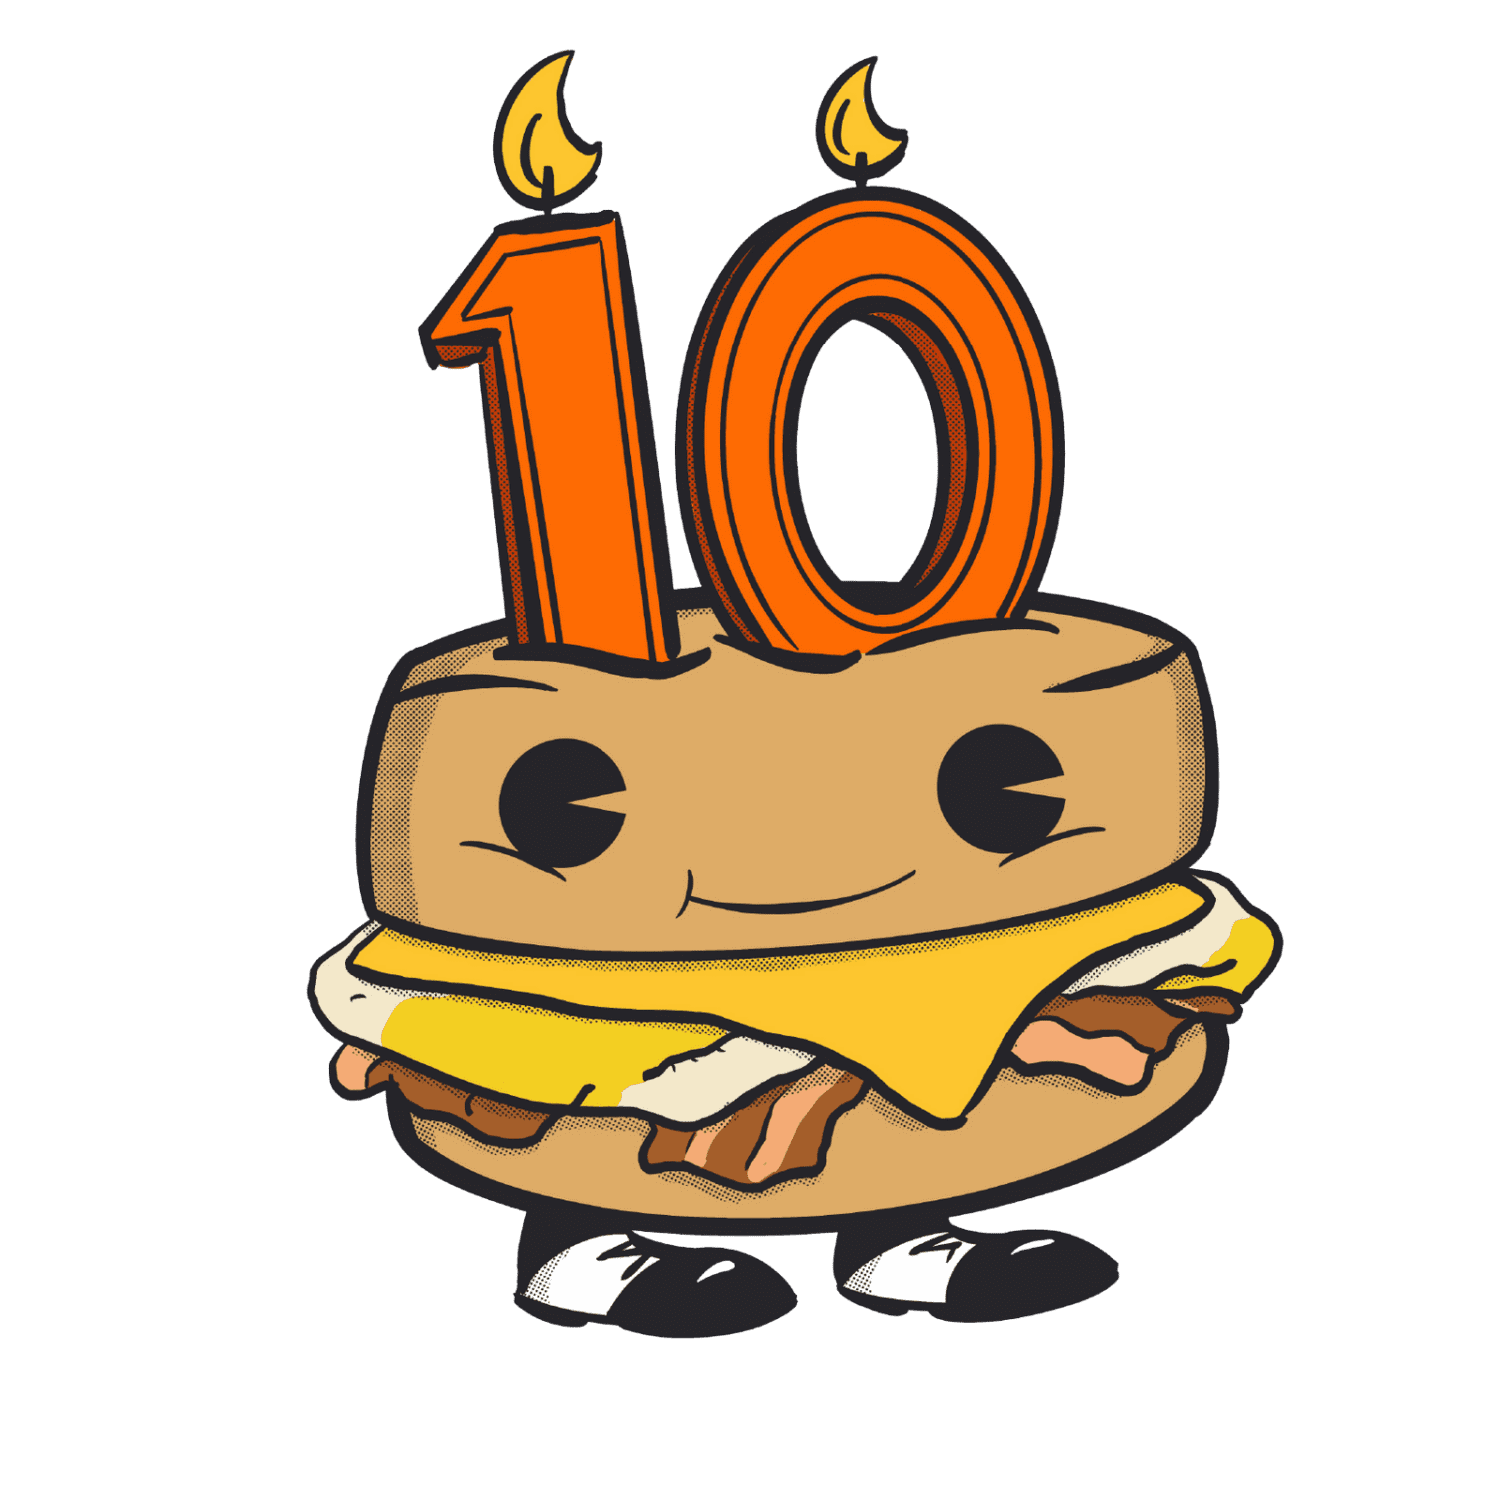 Illustration of a walking biscuit sandwich with candles in the number 10 on head